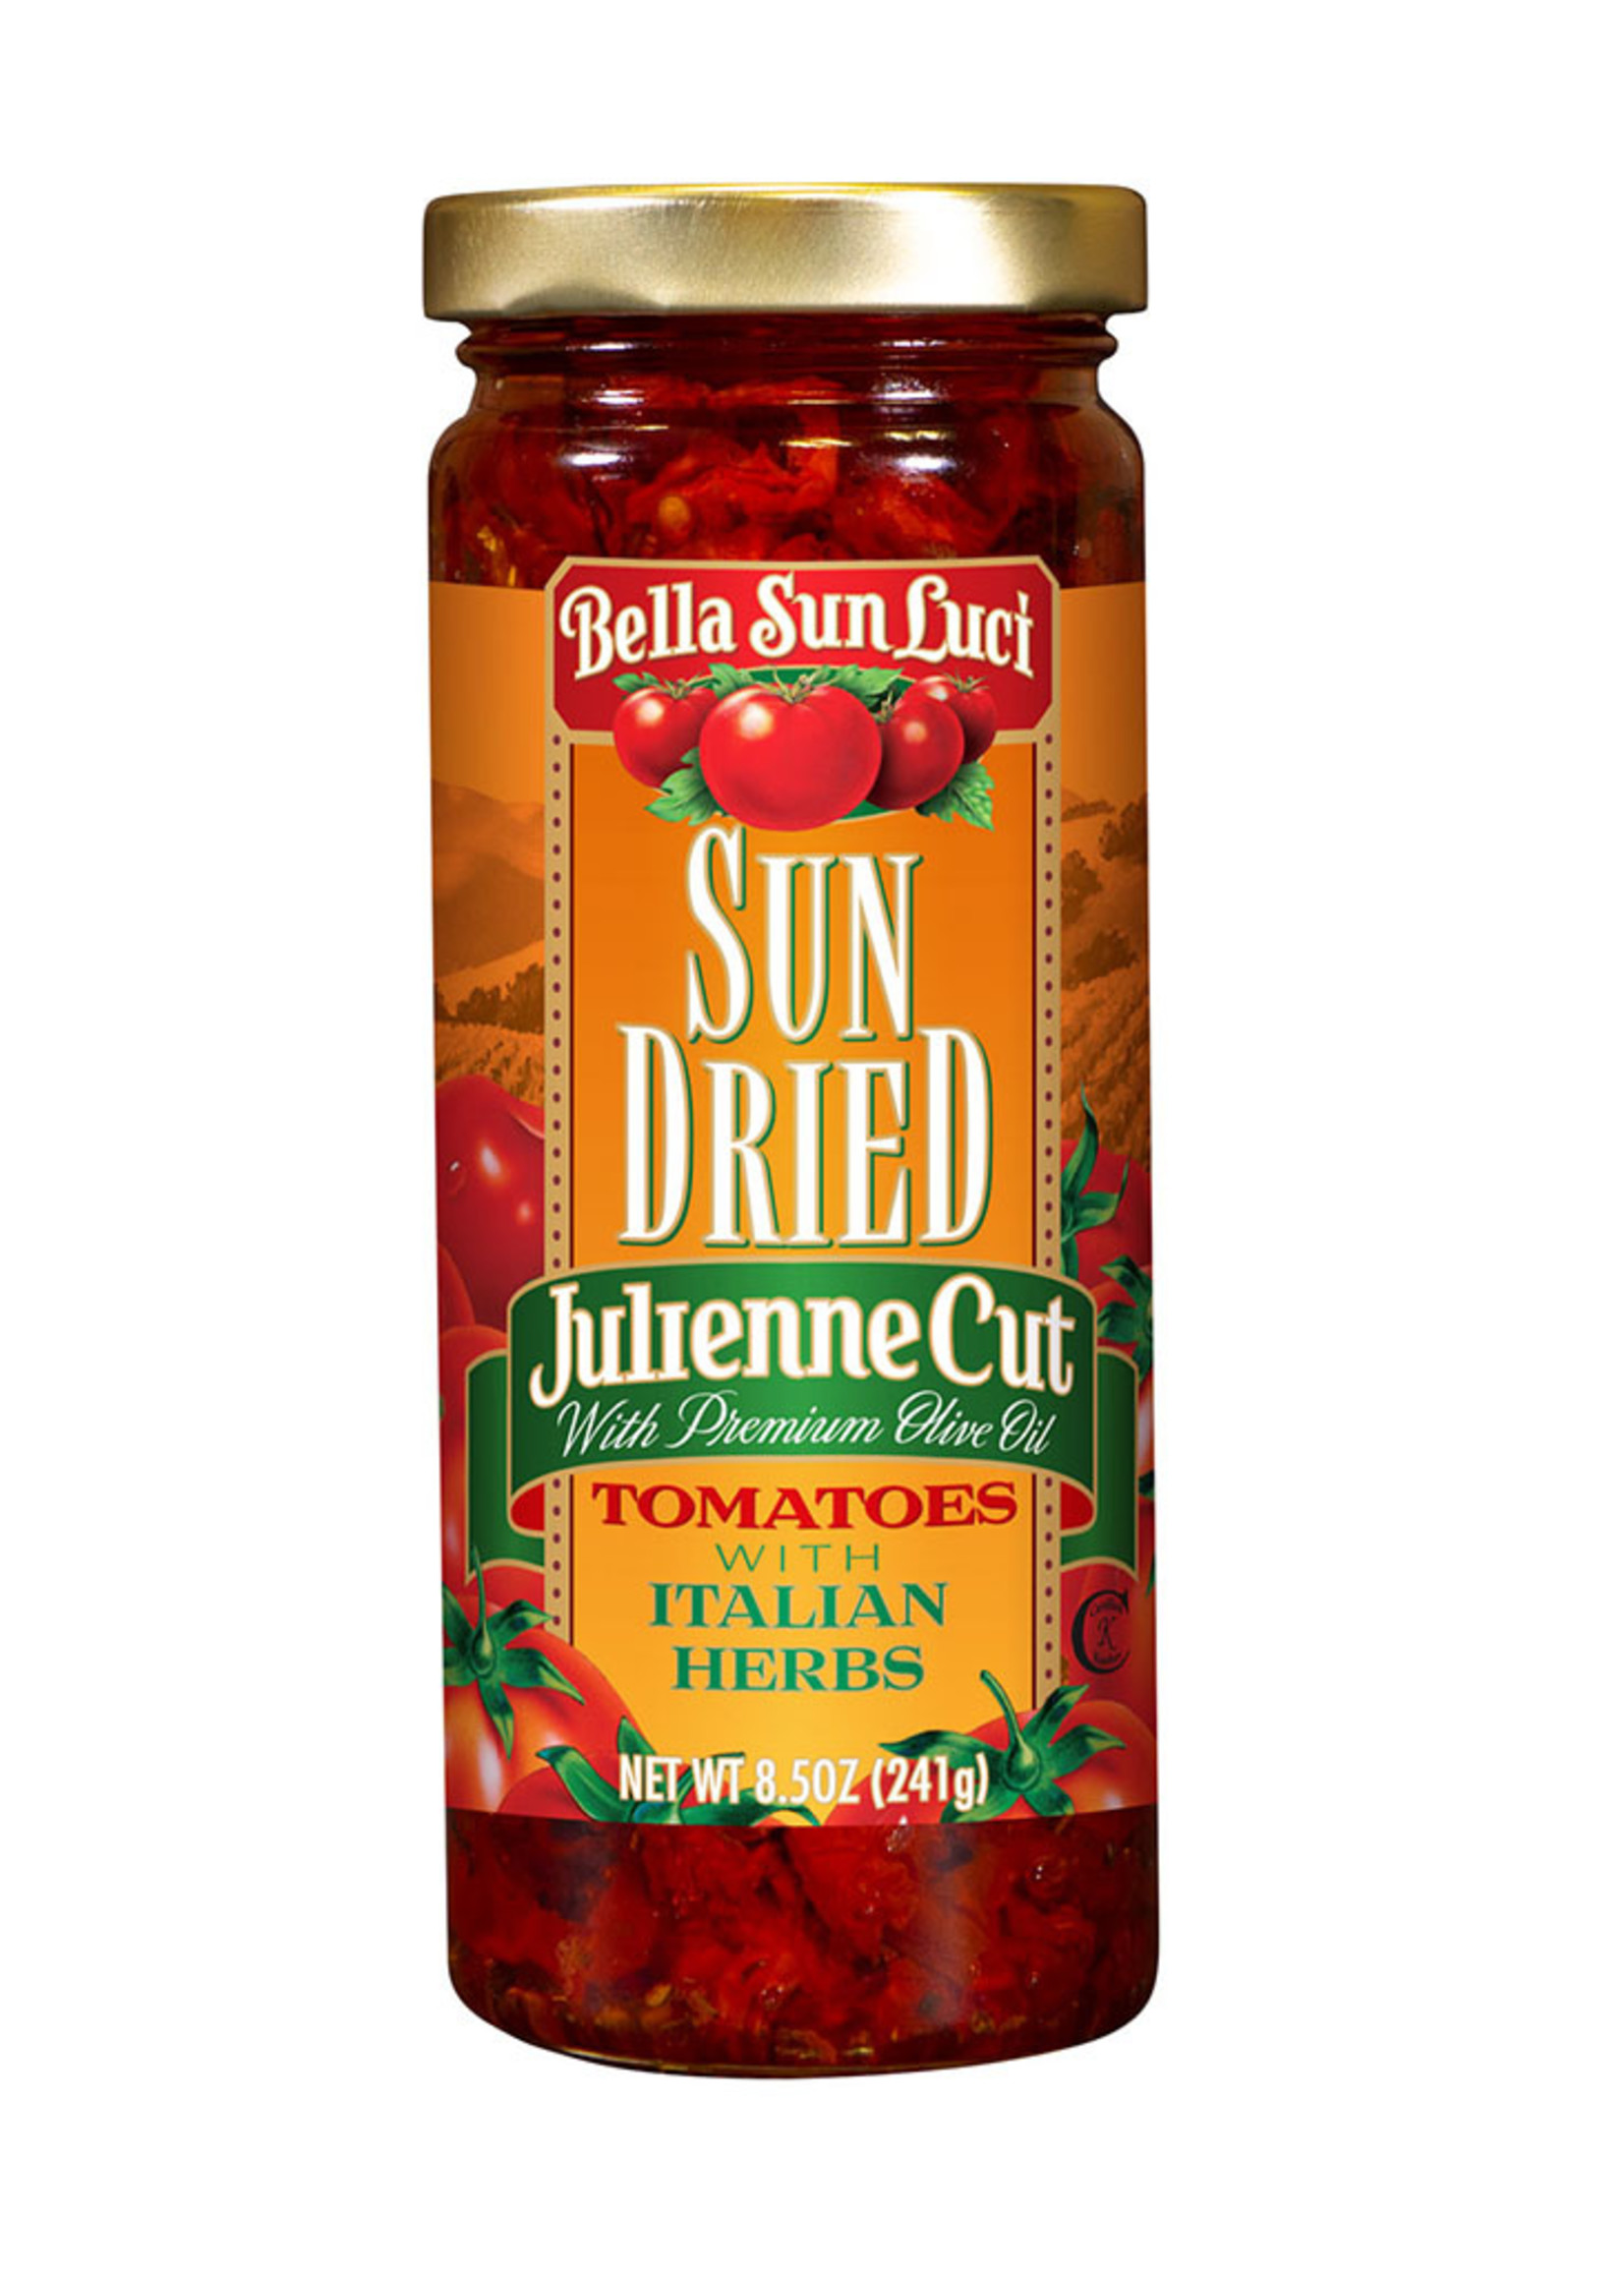 Mooney Farms Bell Sun Luci Sun Dried Julienne Cut Tomatoes In Olive Oile With Italian Herbs 8.5oz